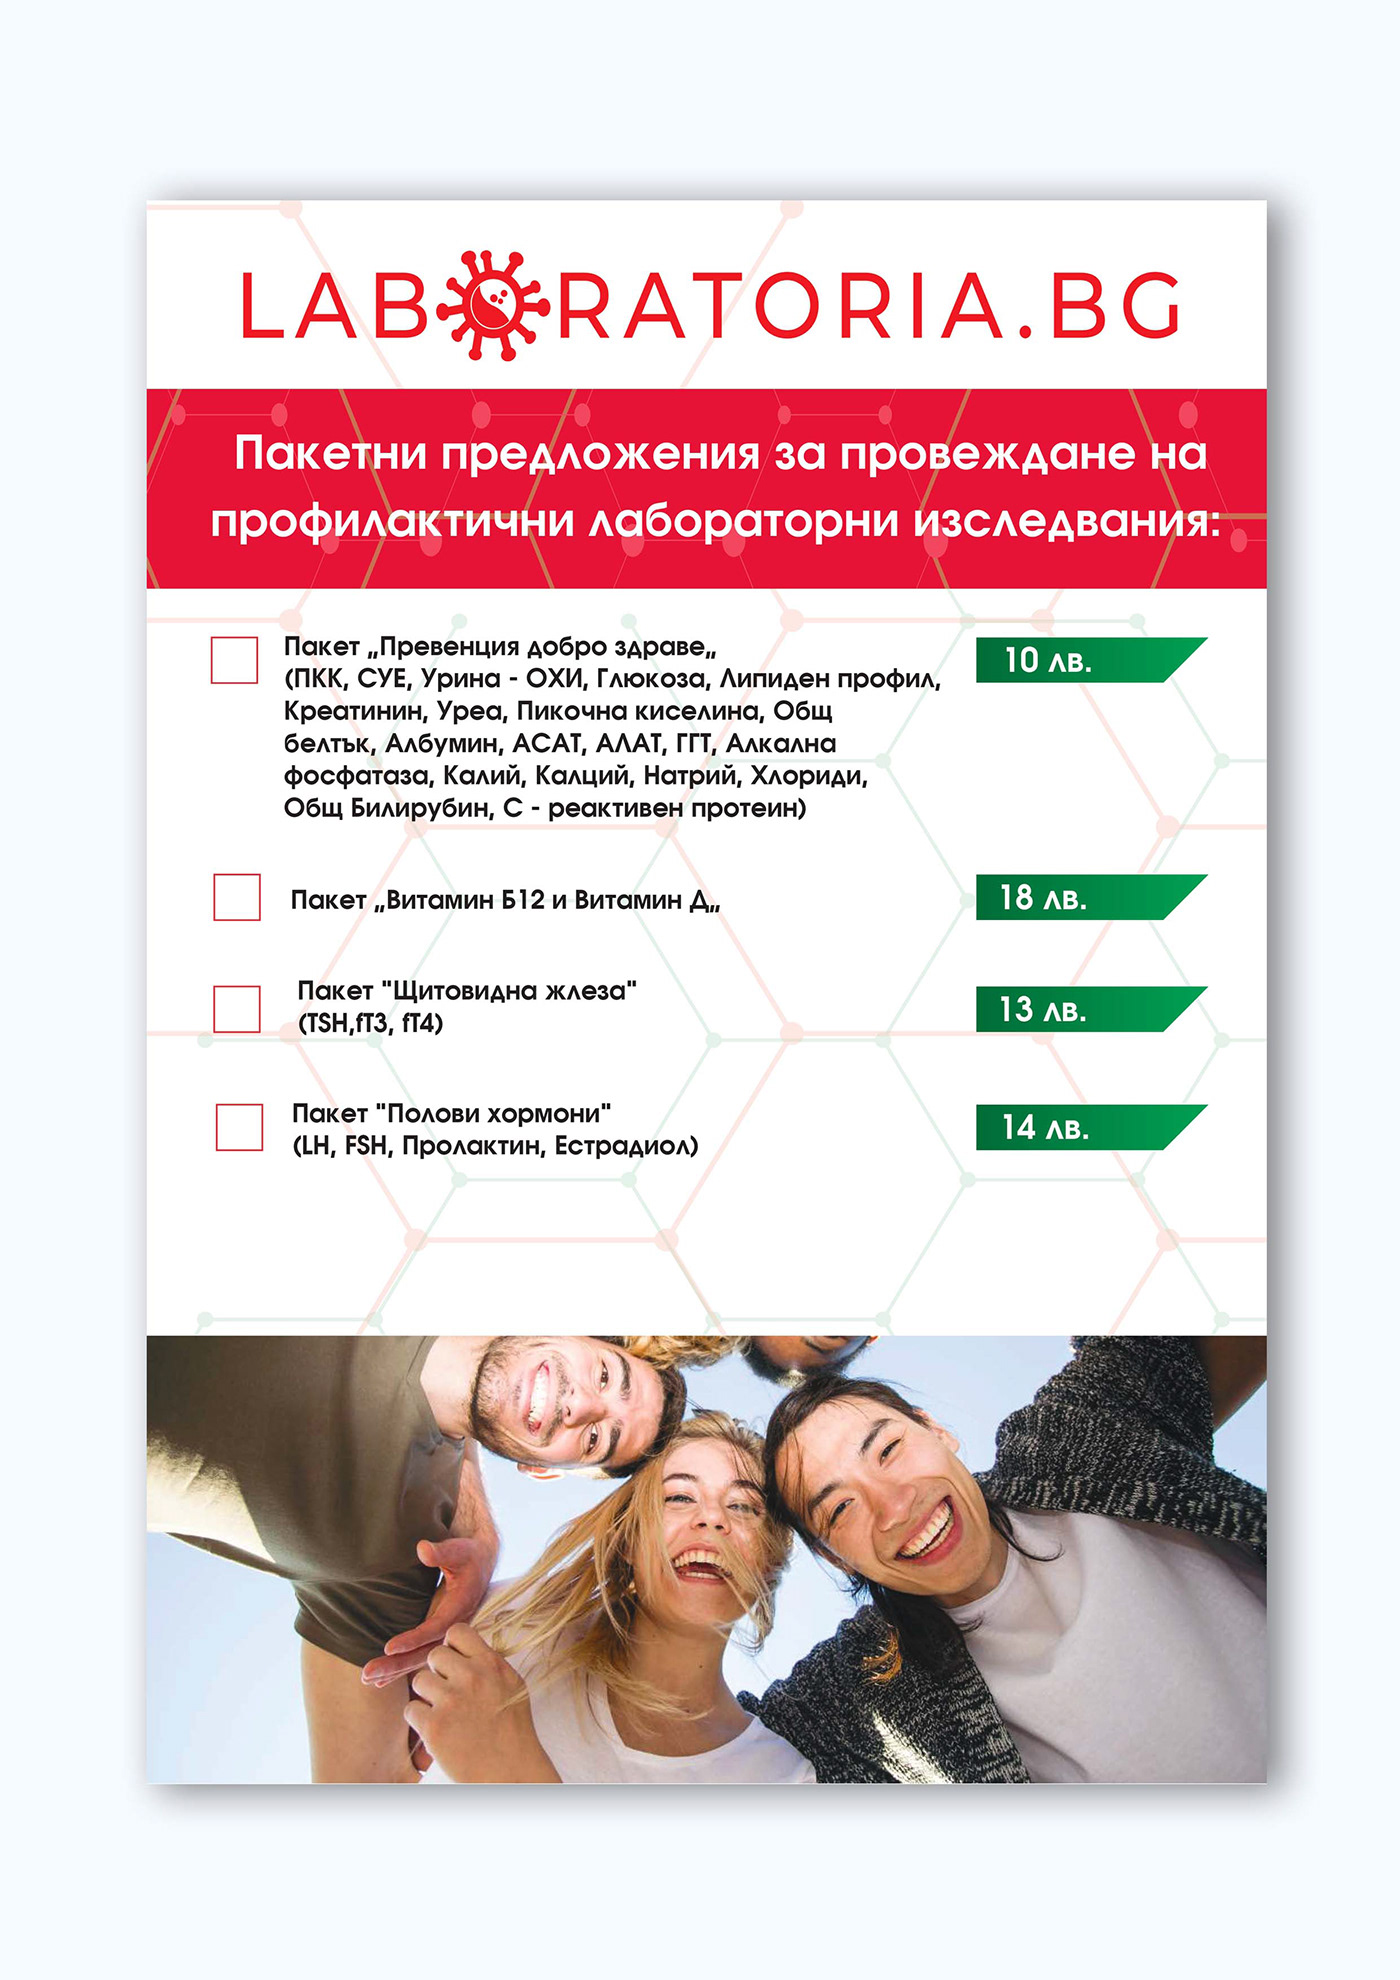 medical price list Web Banner commercial laboratory minimal design clientwork vector Cyrillic bulgarian